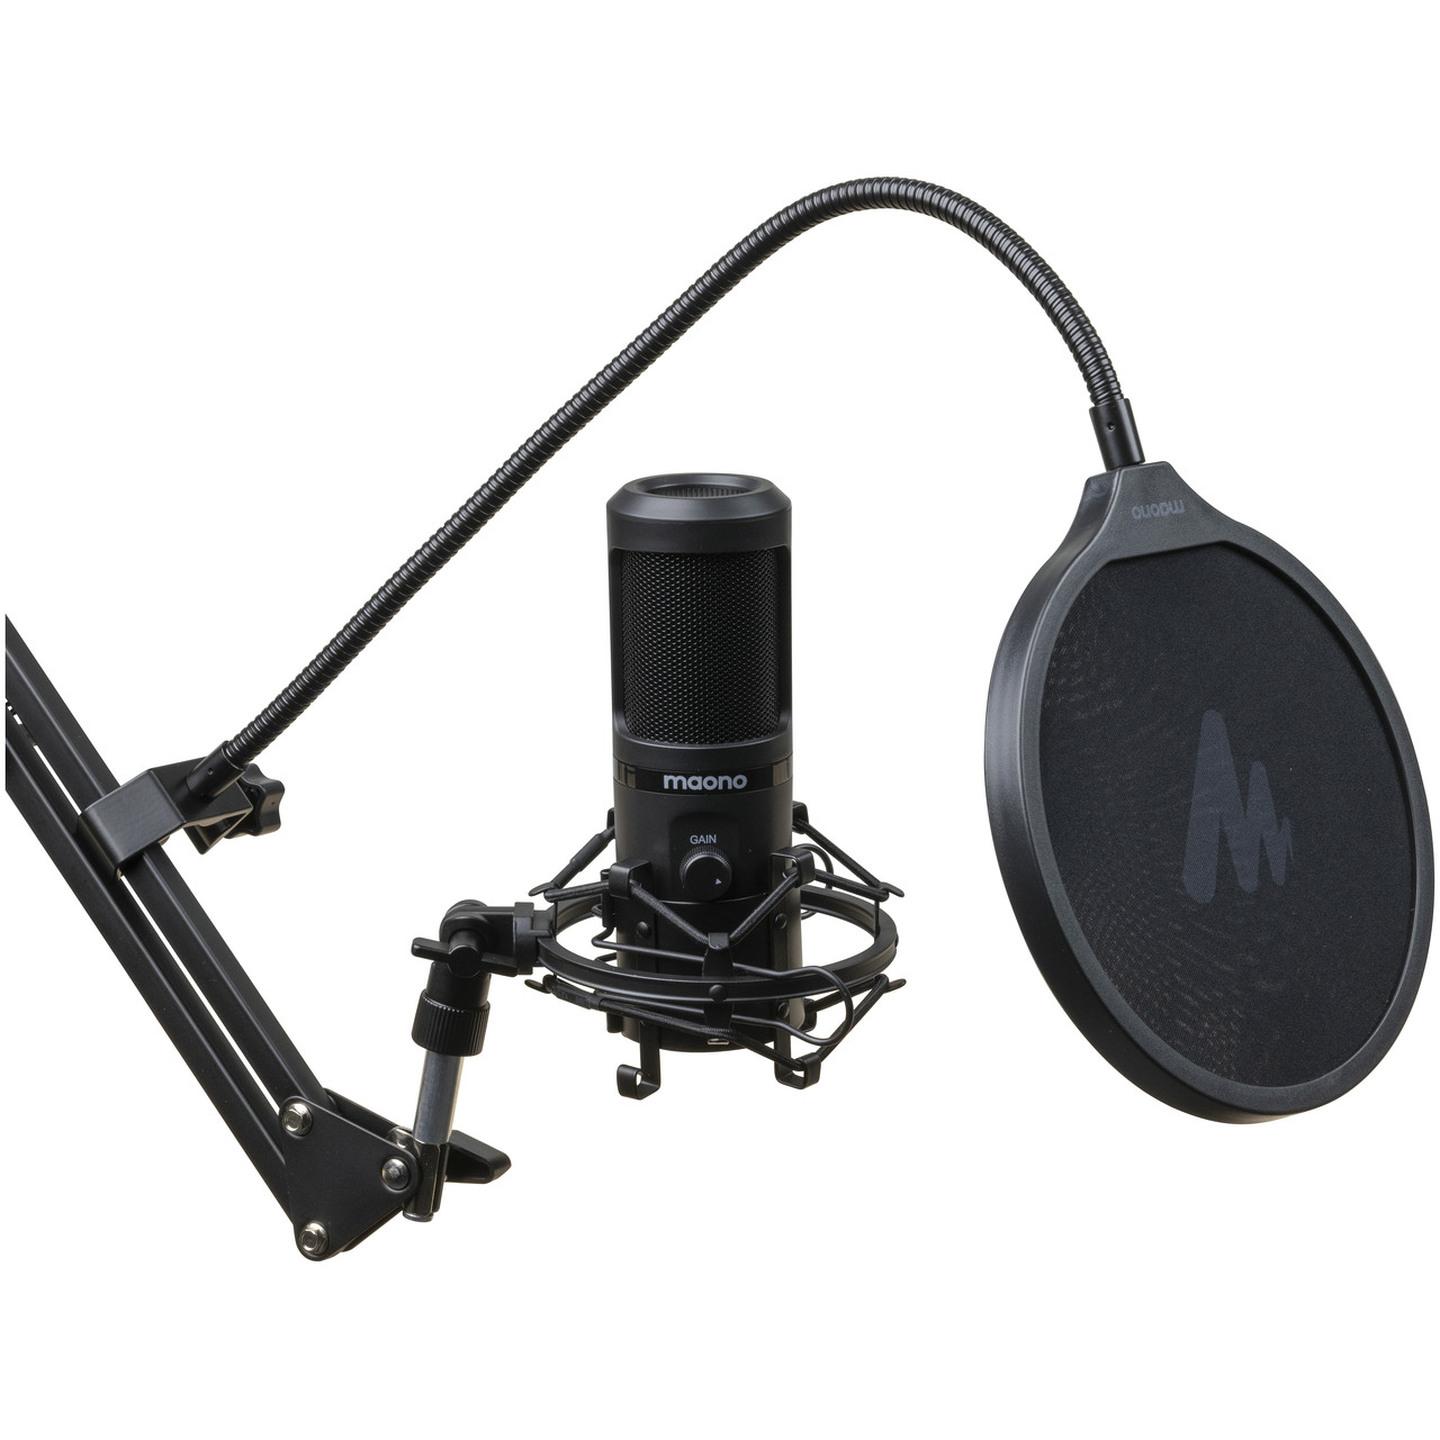 Maono 192KHZ/24BIT Professional Podcast Microphone with Desk Mount Arm and Accessories